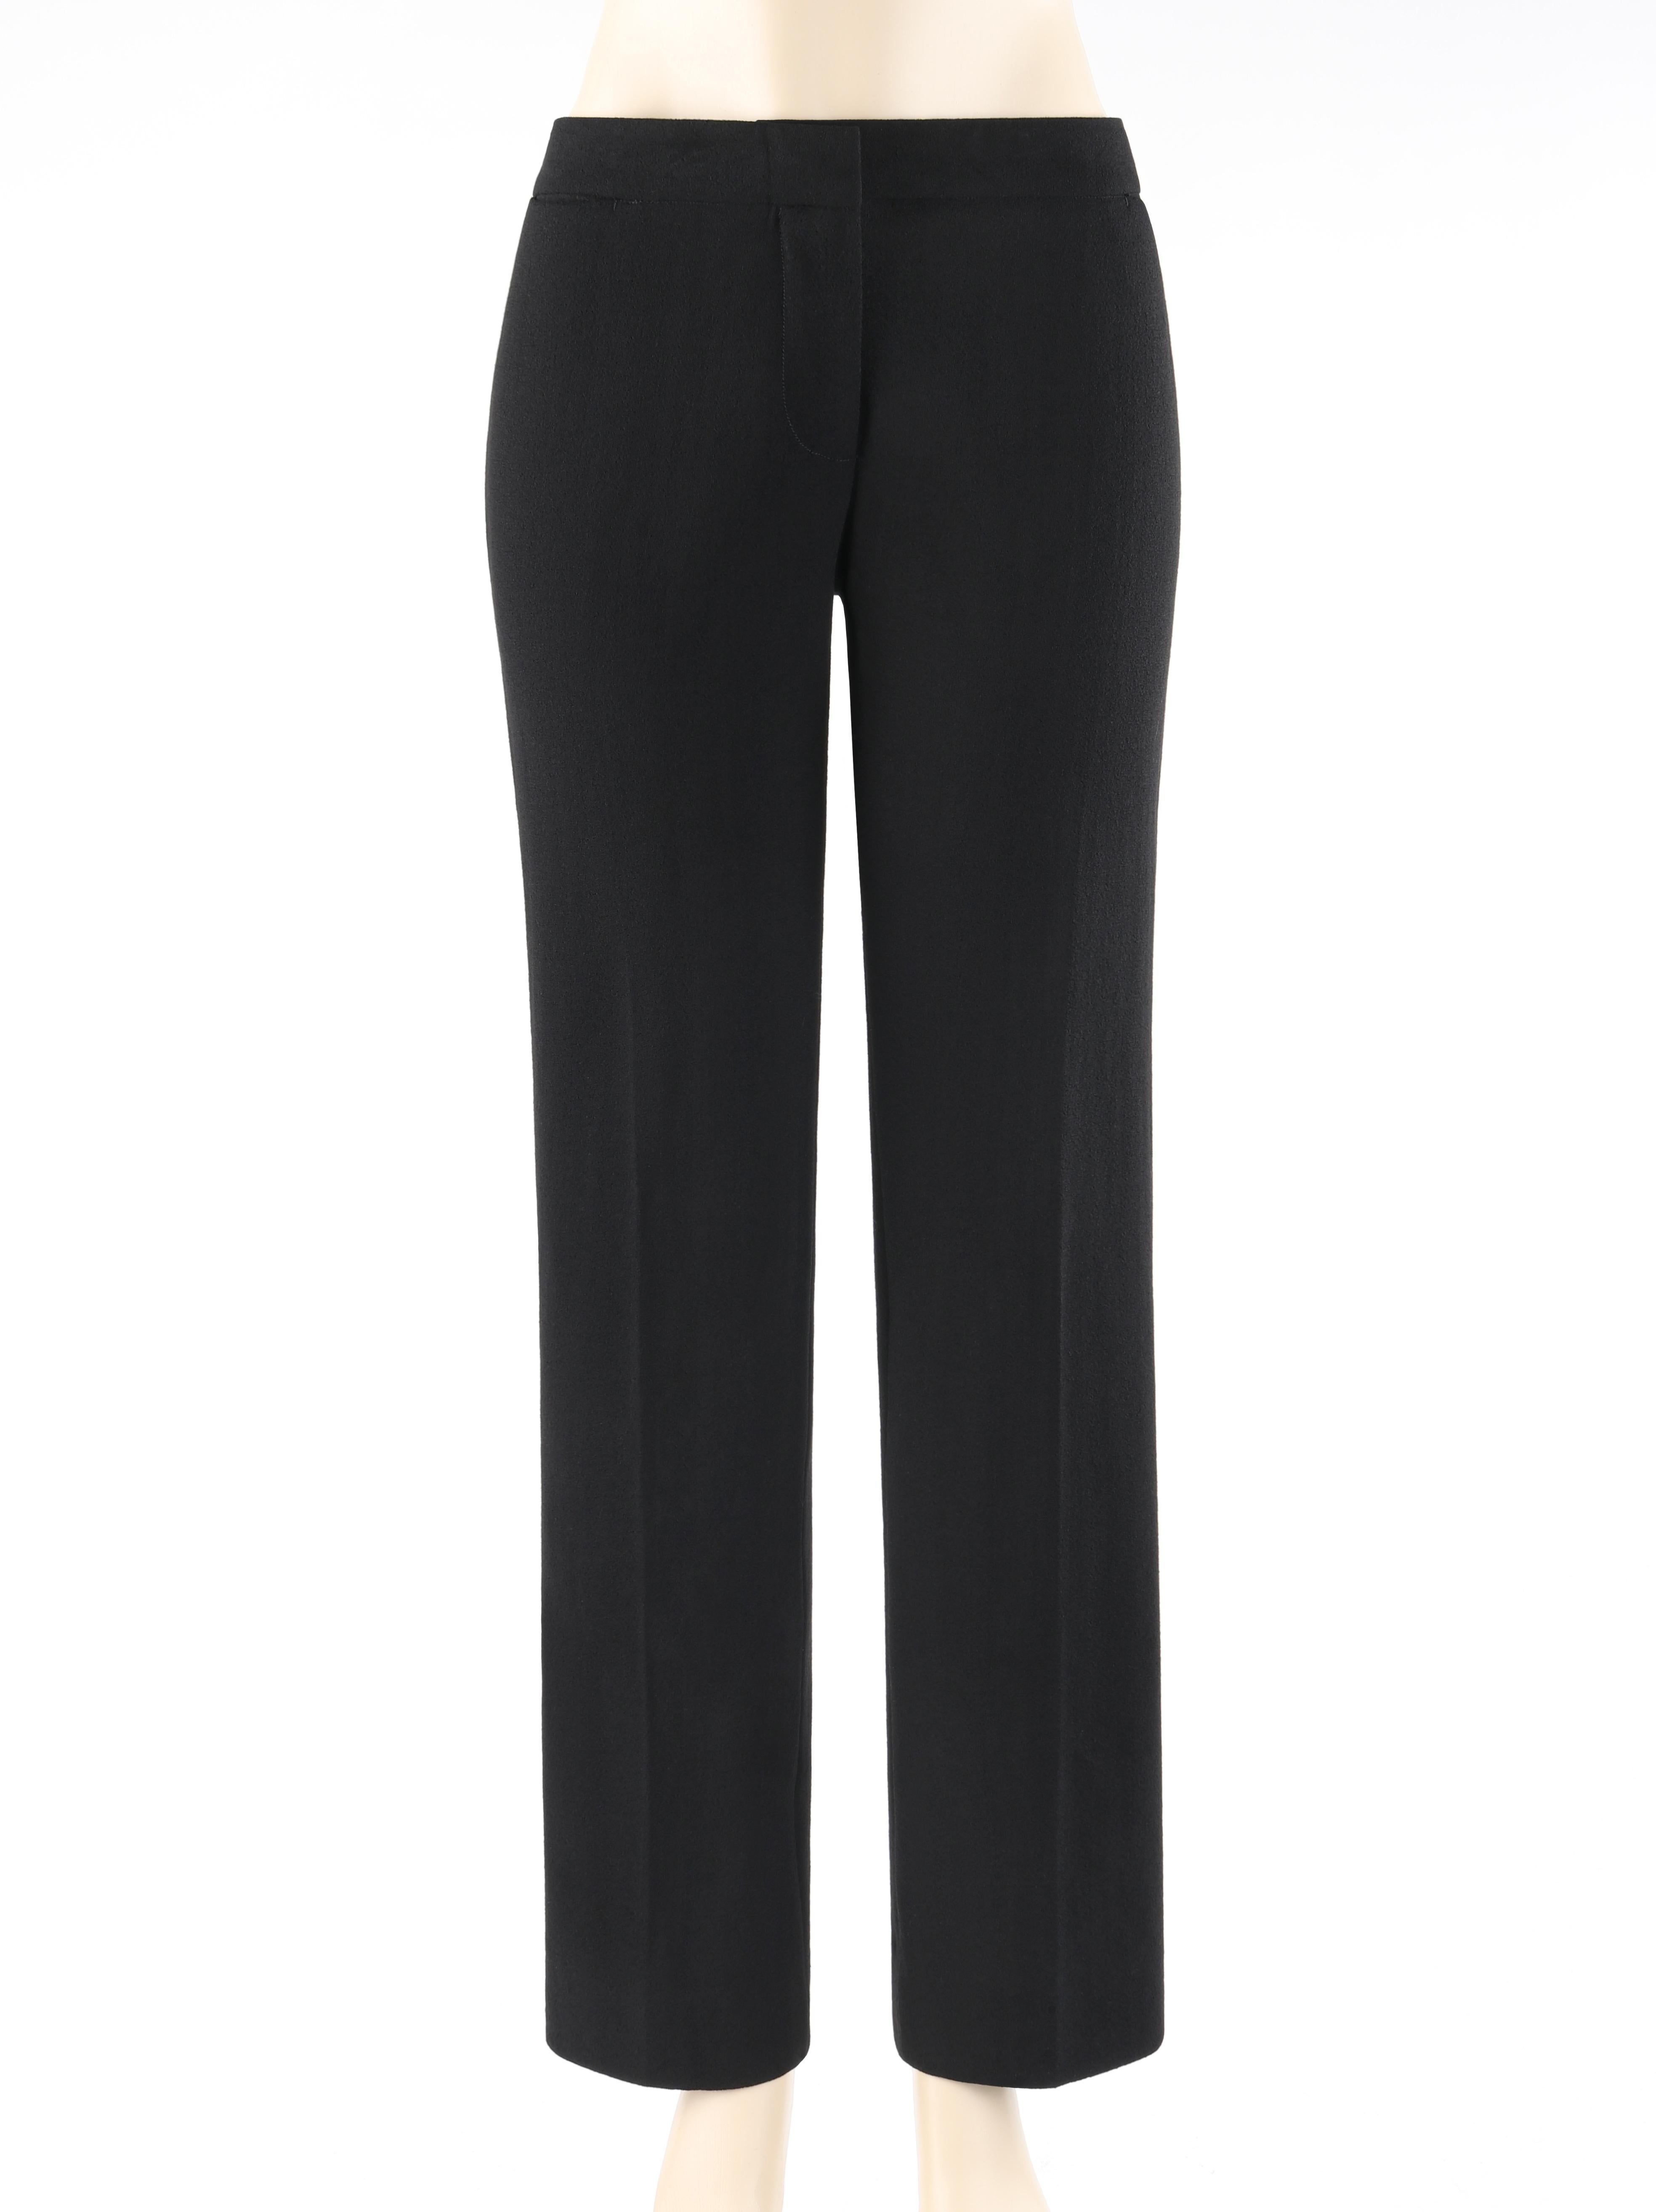 ALEXANDER McQUEEN A/W 2006 “The Widows of Culloden” Black Crepe Trouser Pants

Brand / Manufacturer: Alexander McQueen
Collection: F/W 2006 “The Widows of Culloden”
Designer: Alexander McQueen
Style: Straight leg trouser pants
Color(s): Black
Lined: